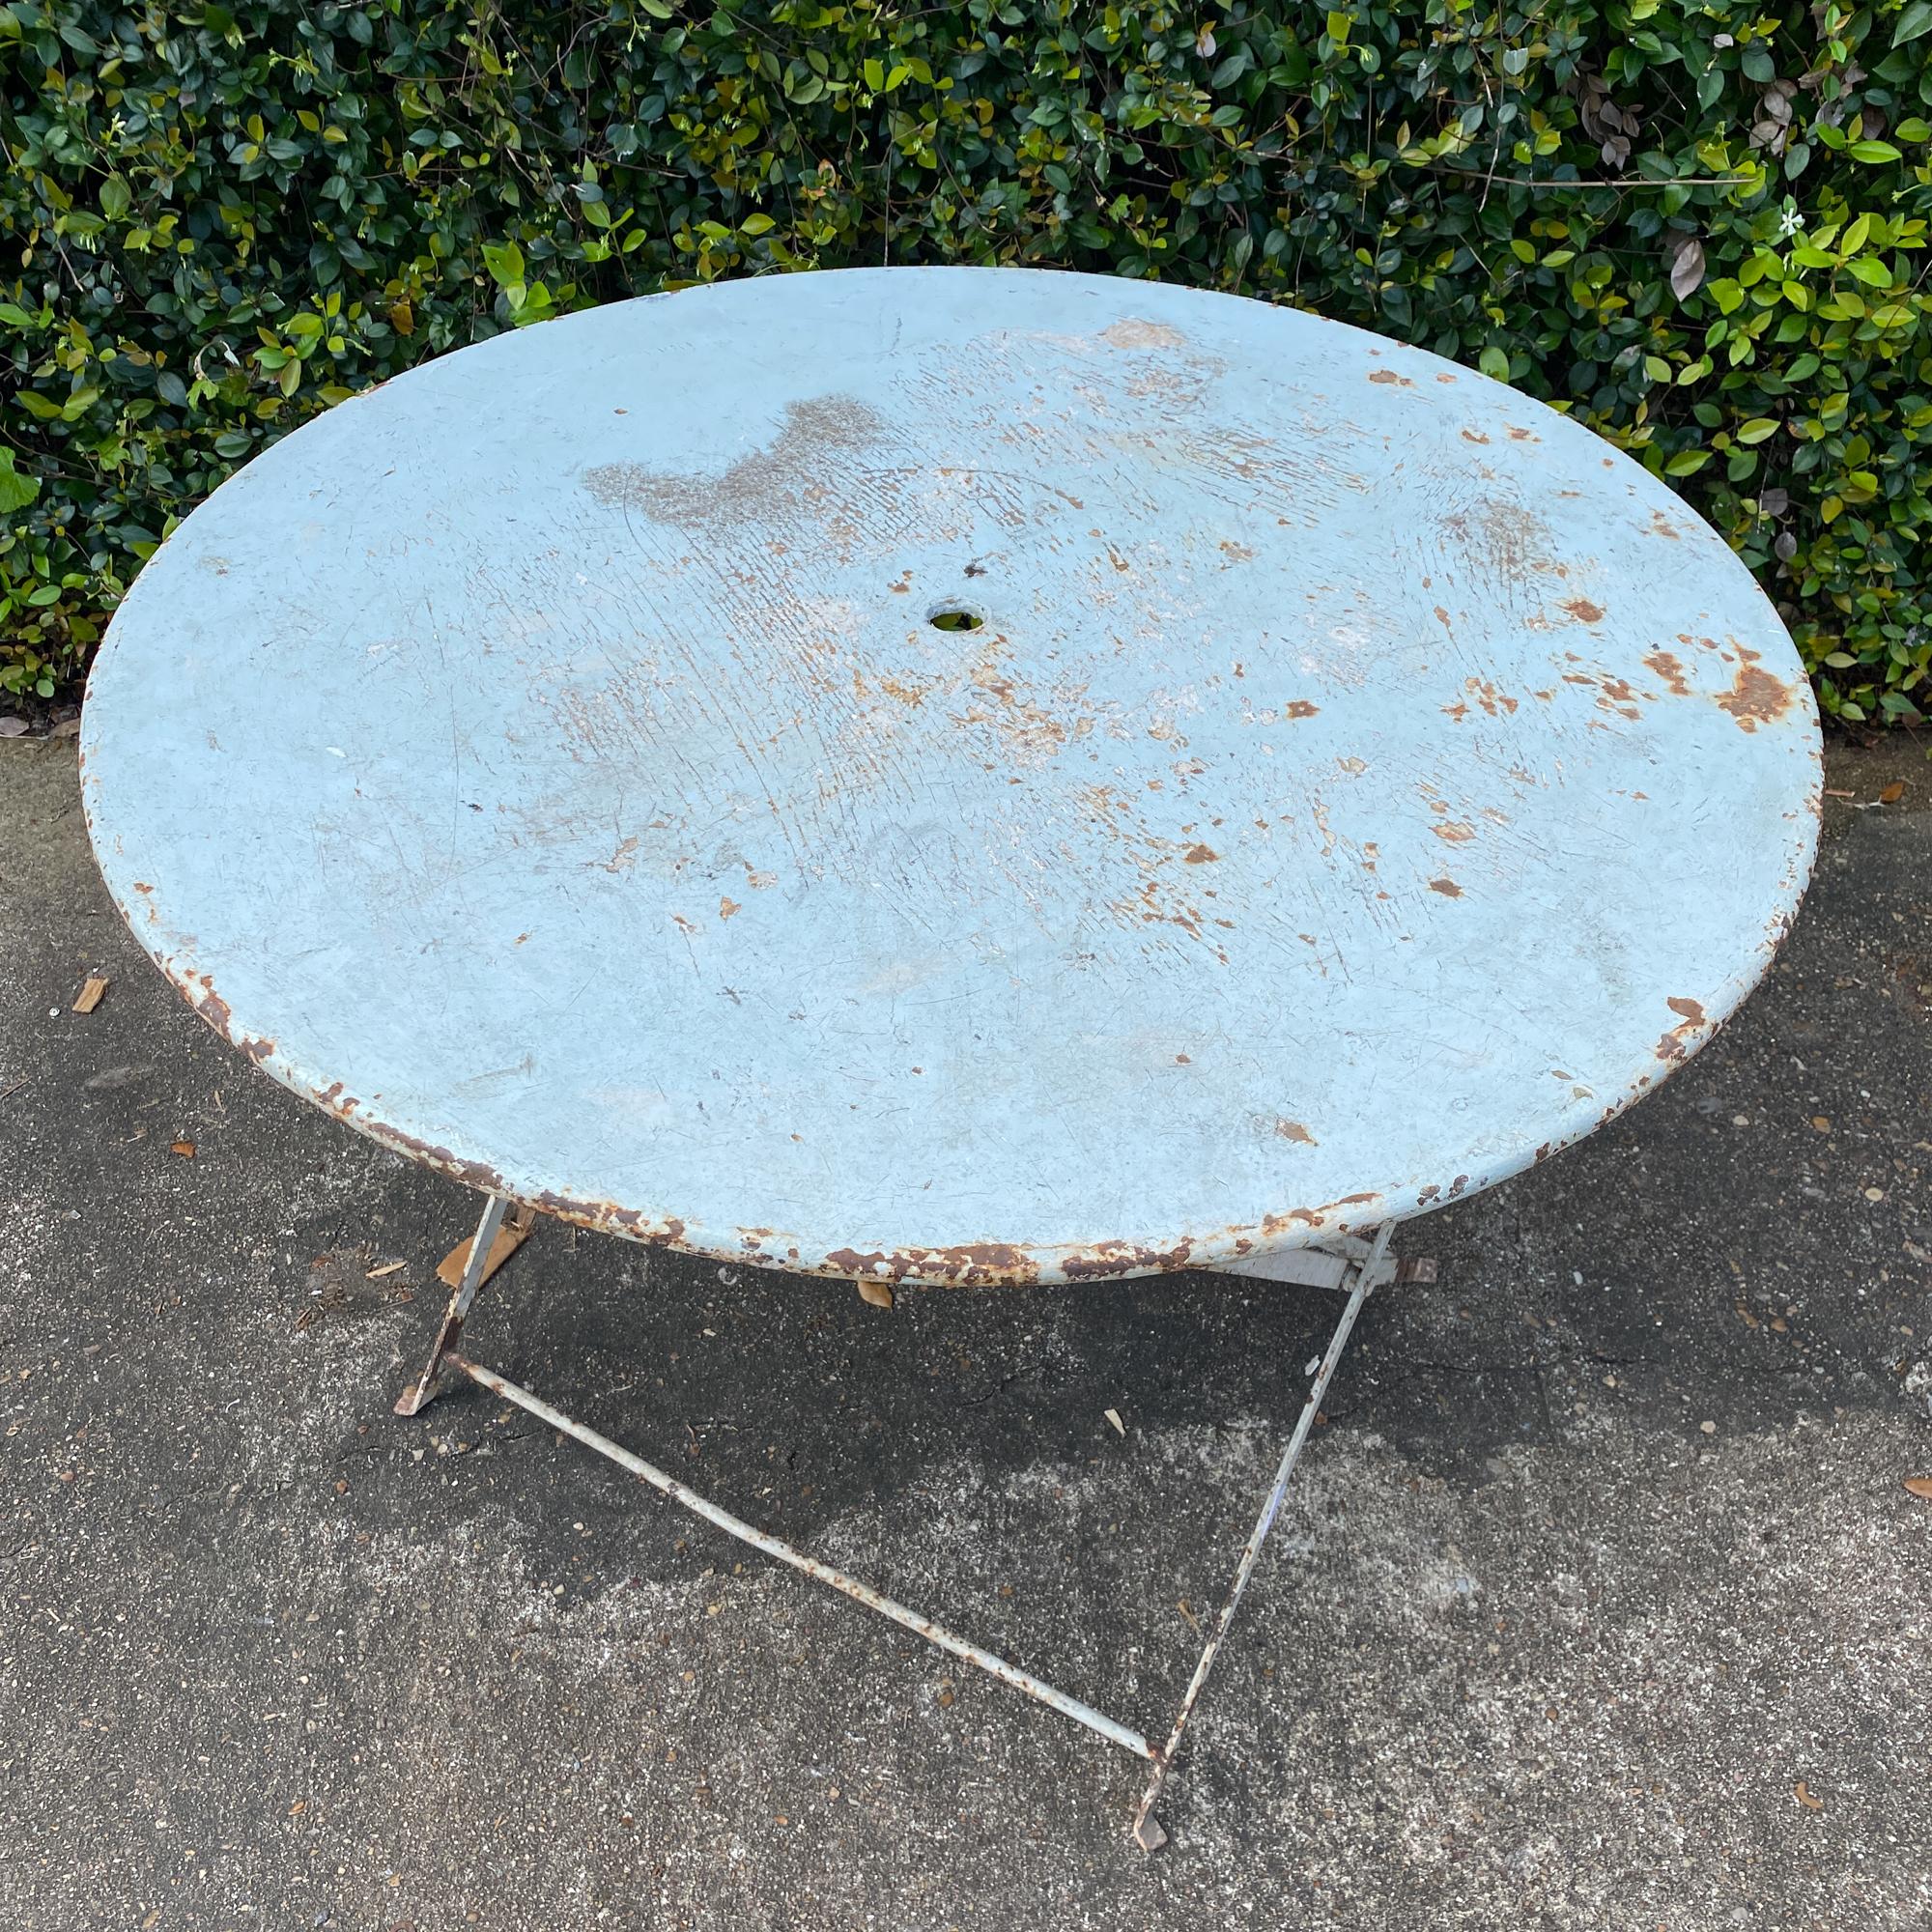 A charming and functional round metal folding table that can be used almost anywhere, this 1930s French metal table features a very pale sky blue finish and space for an umbrella. The simple wrought iron legs are painted to match and the table opens